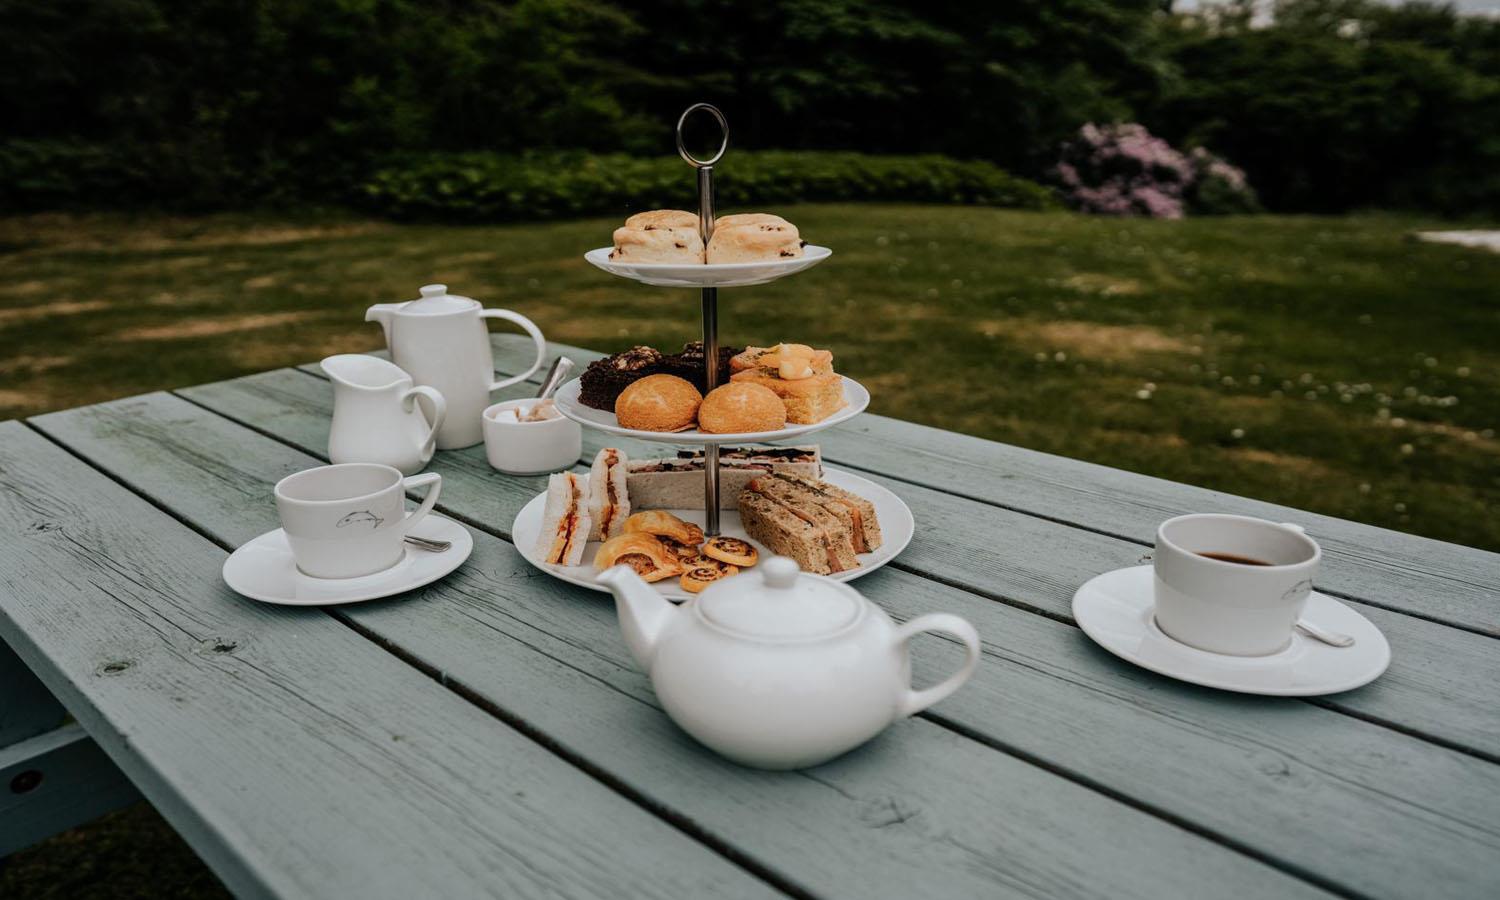 Afternoon Tea in the hotel gardens